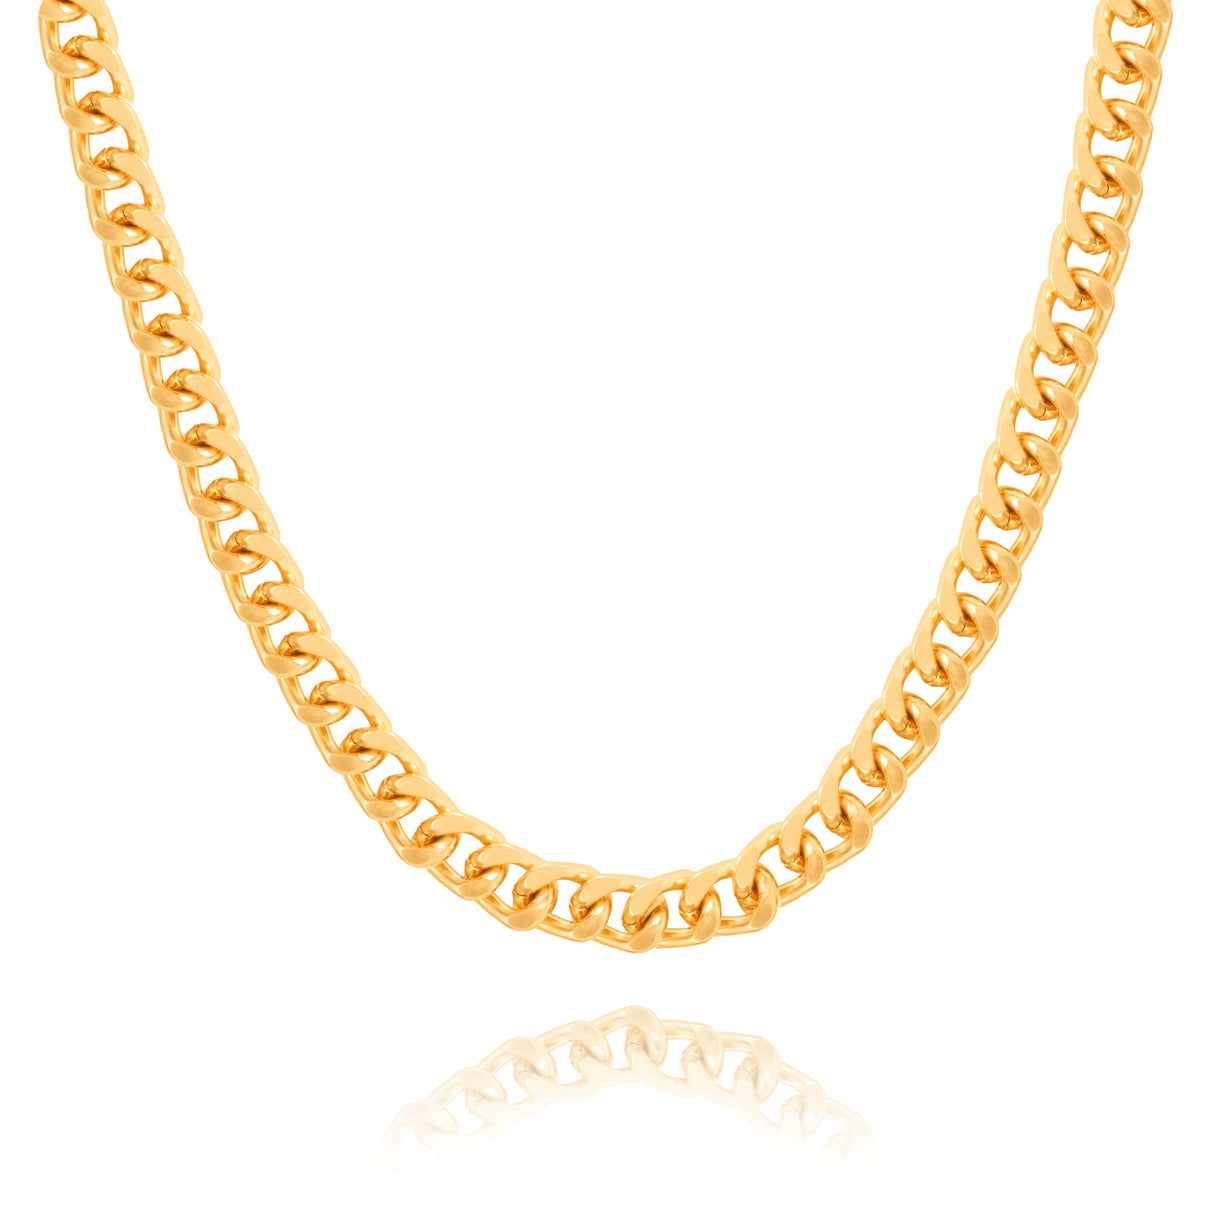 Cuban Link Chain Necklace for Men Women 14K Gold Silver Plated - GexWorldwide